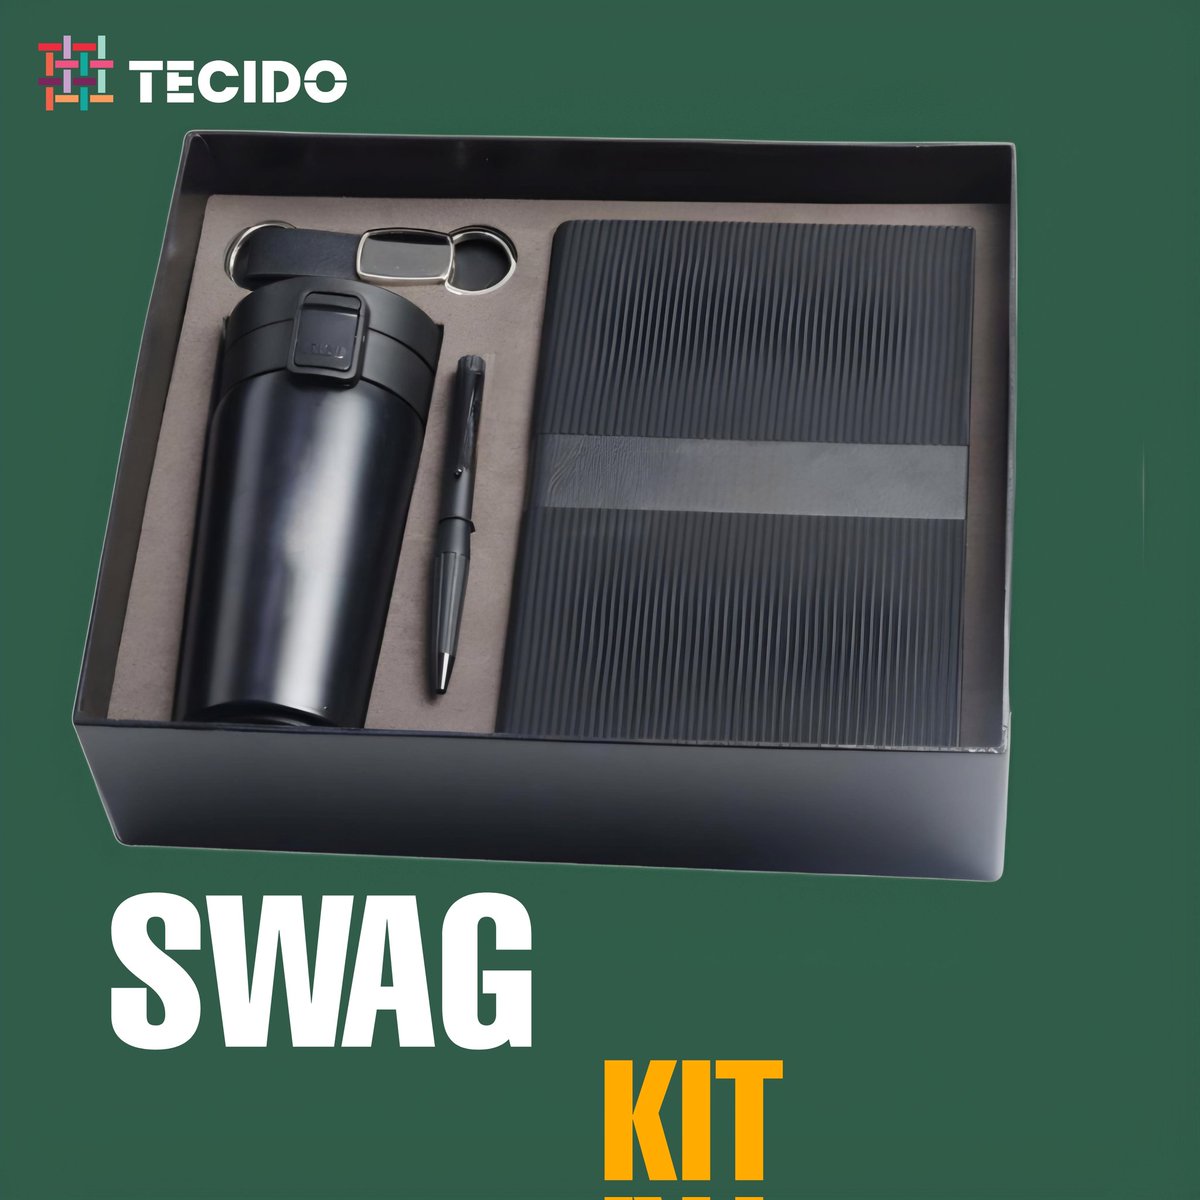 Unleash Your Swag with our ultimate swag kit! 🎉✨ Stay organized with a sleek diary, sip in style with a vacuum flask, jot down ideas with a trendy pen, and carry your keys with flair using our keychain.

#corporategifting #brandedgifts #SwagKits #customization #ElevateYourStyle